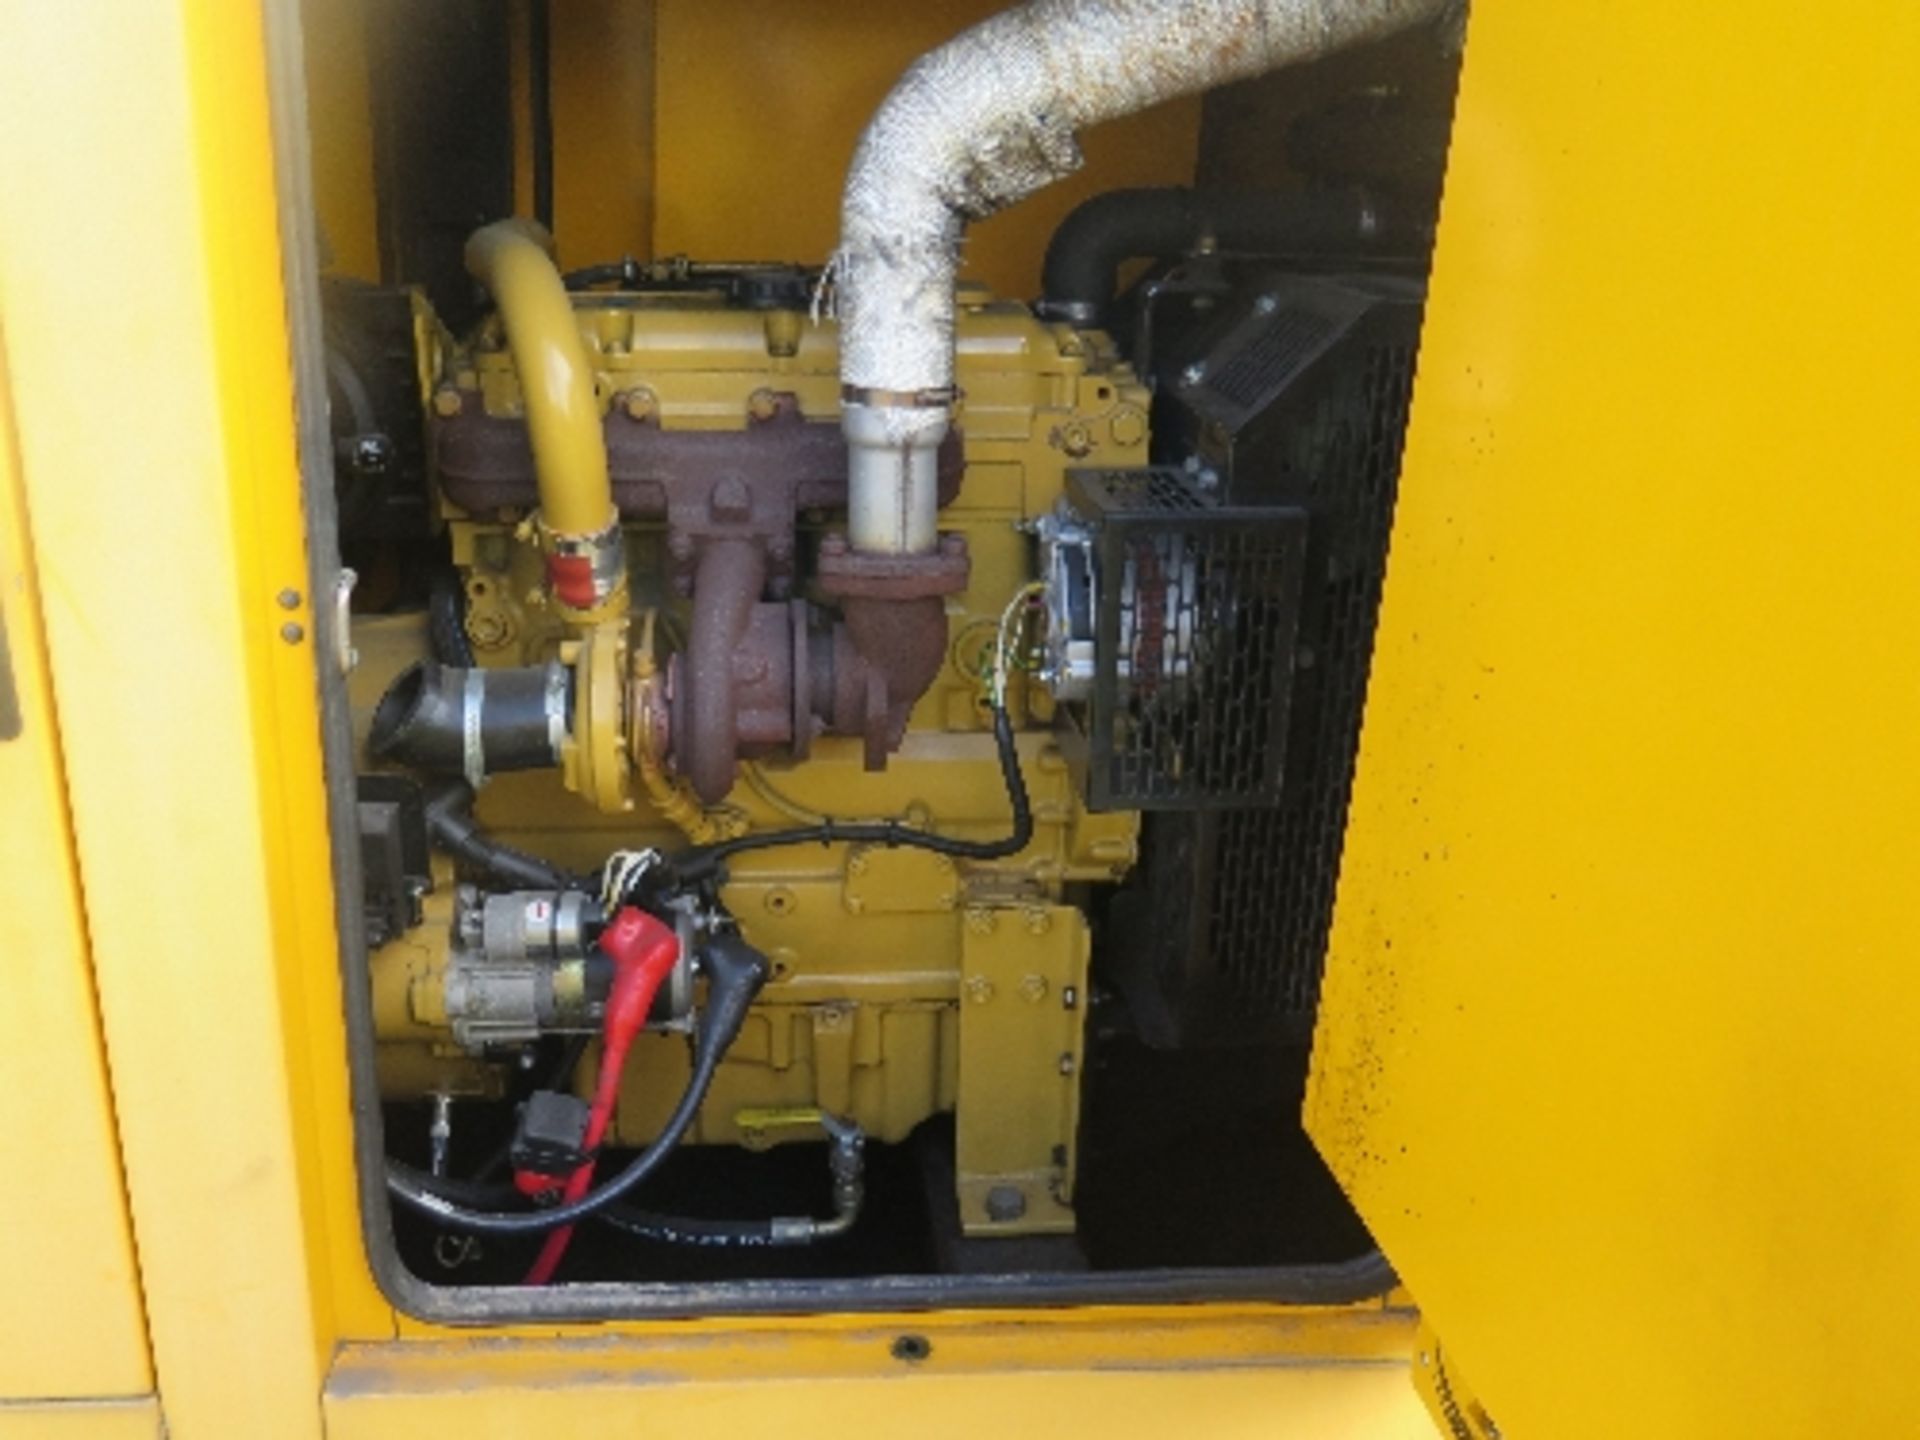 Caterpillar XQE80 generator 10433 hrs 145934
PERKINS - RUNS AND MAKES POWER
ALL LOTS are SOLD AS - Image 6 of 6